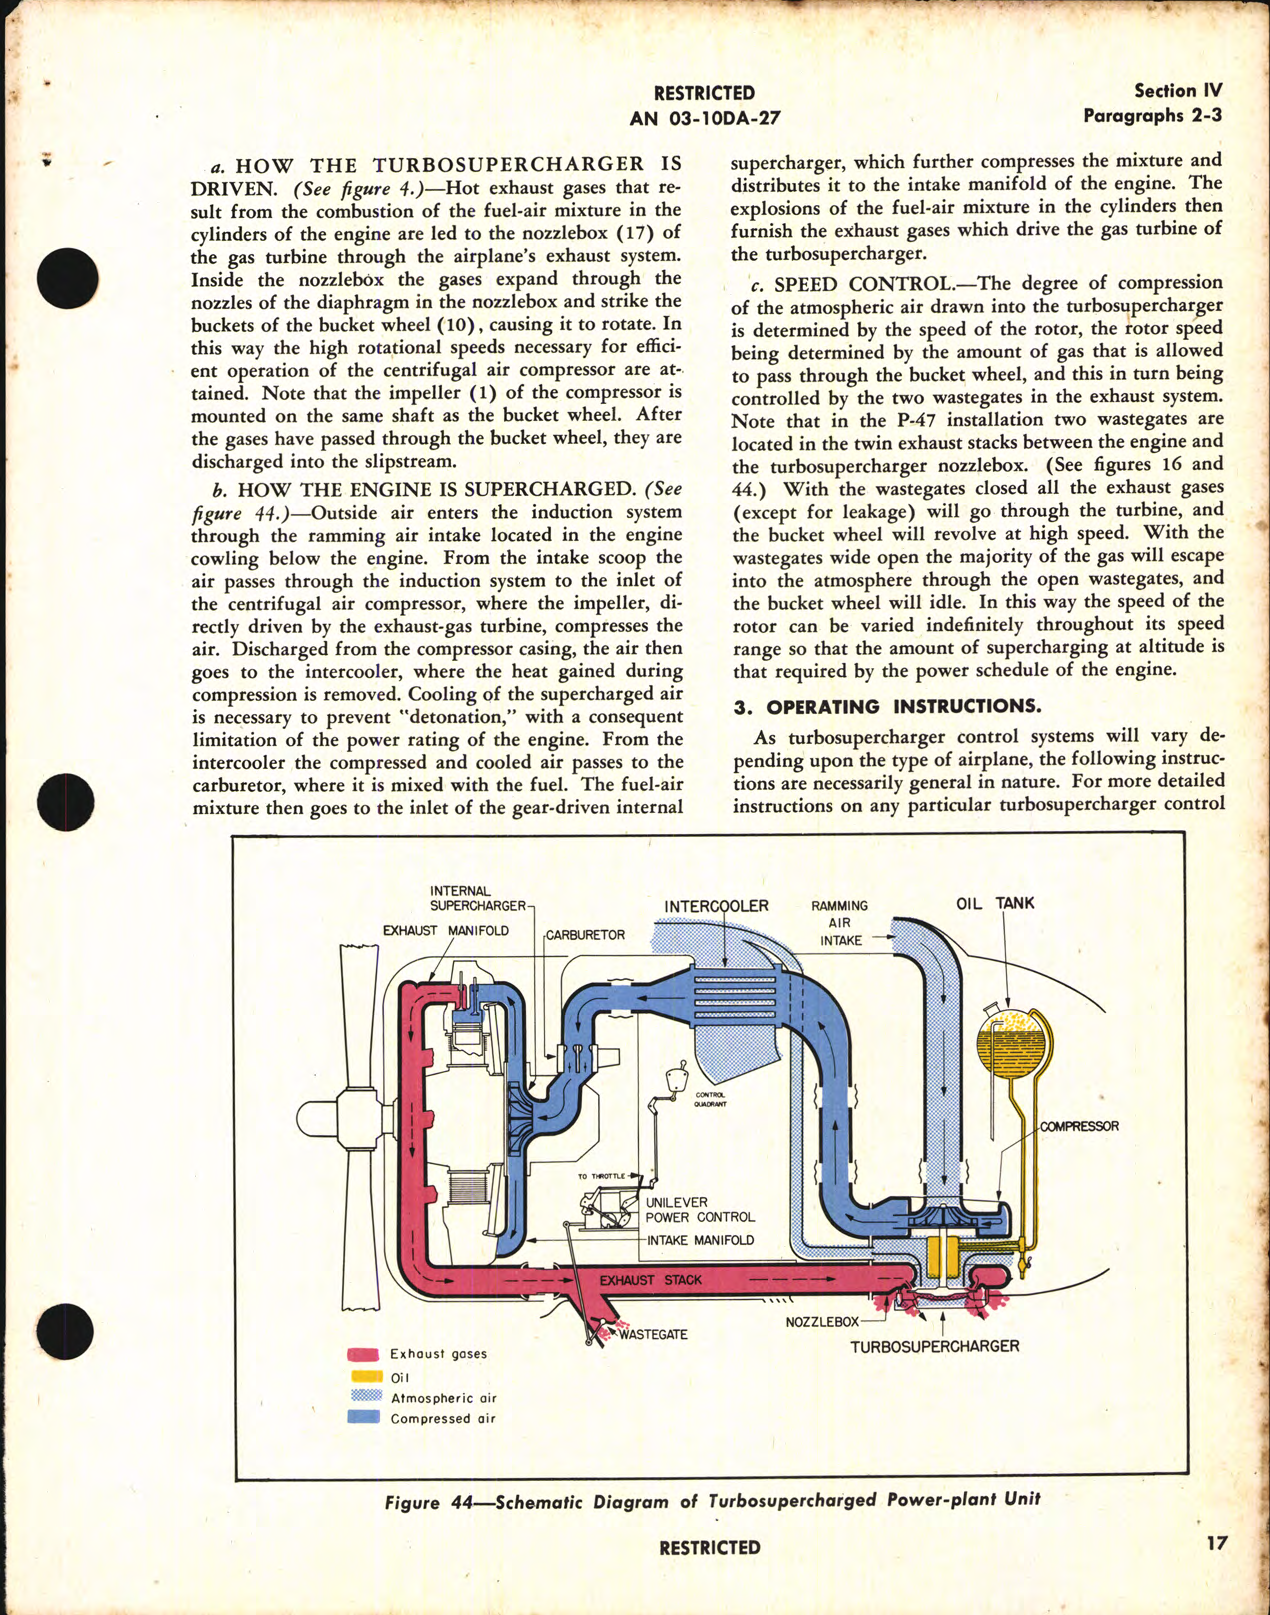 Sample page 7 from AirCorps Library document: Operation, Service, & Overhaul Instructions with Parts Catalog for Turbosuperchargers CH-5 Series